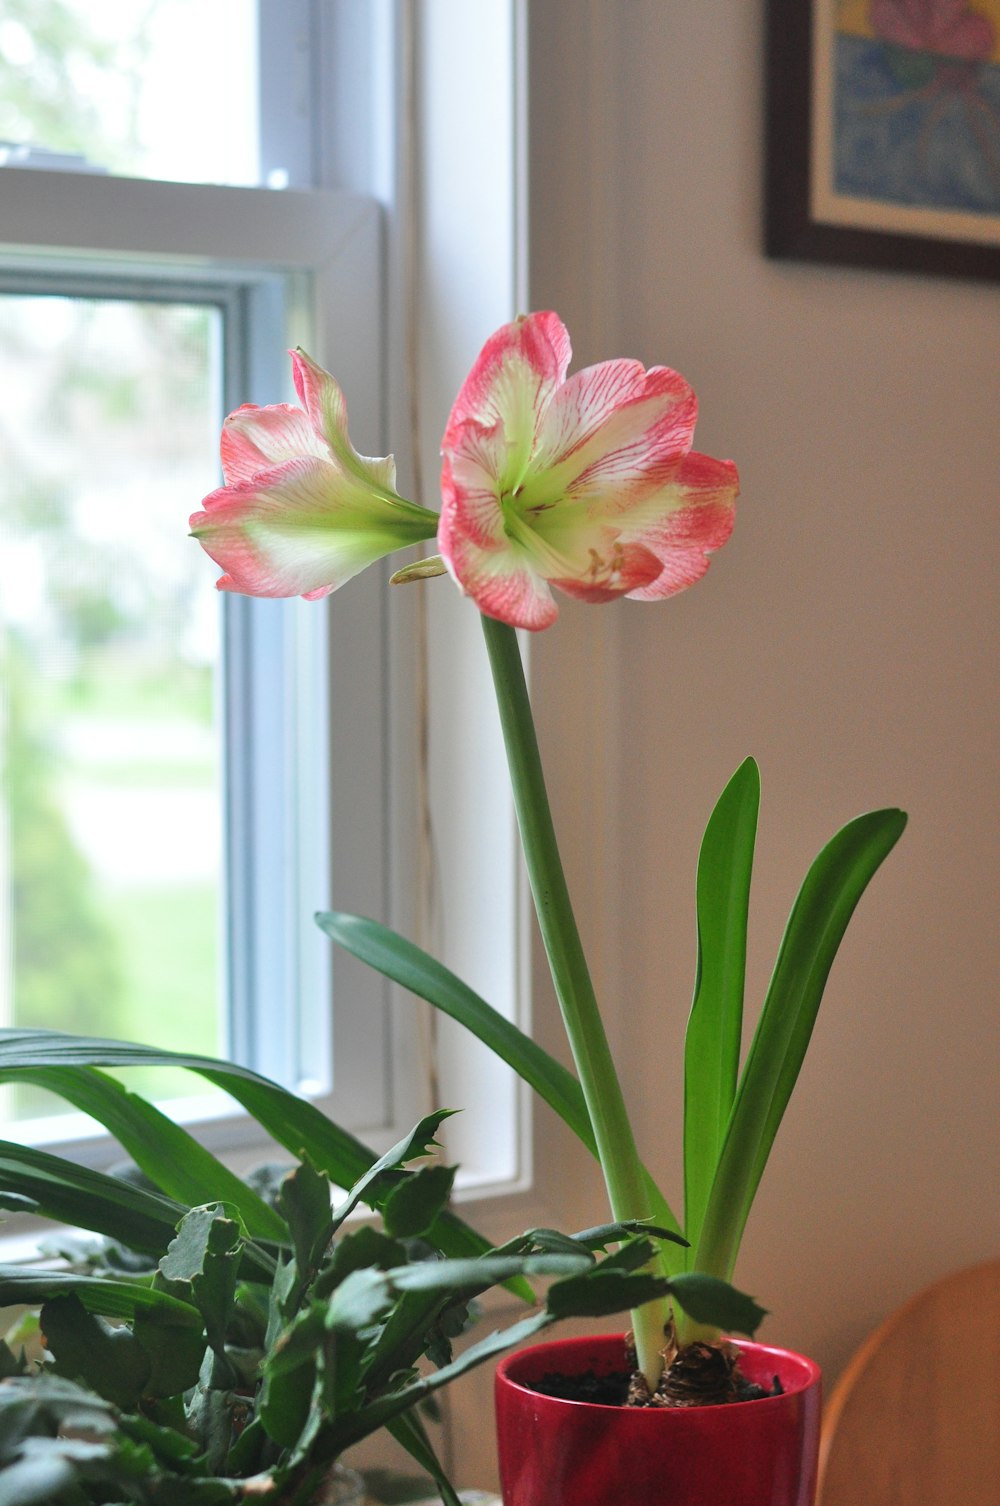 pink and white flower in front of window